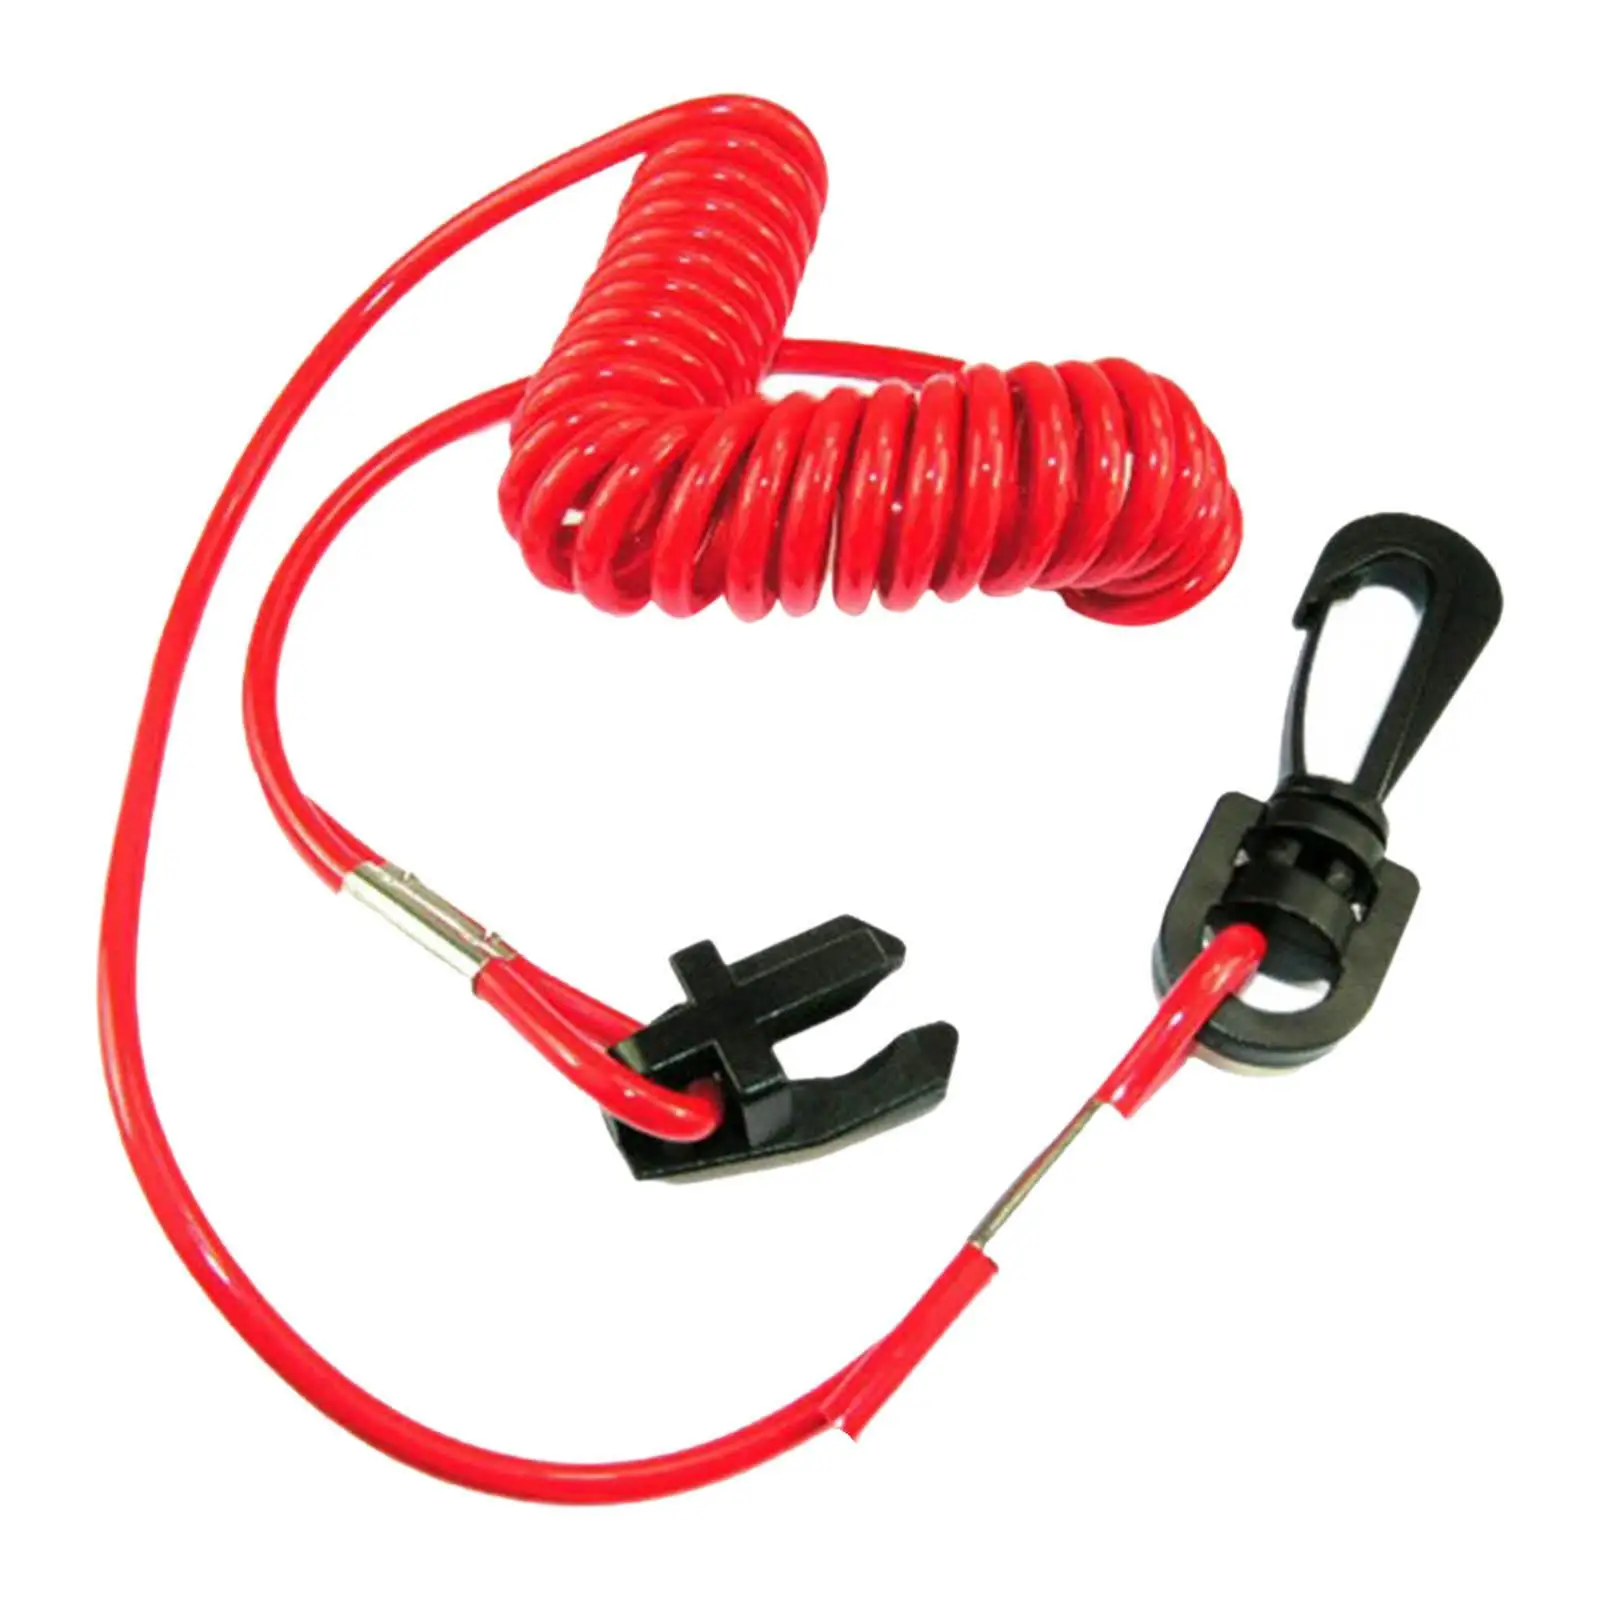 Outboard Engine Motor Safety Kill Stop Switch Lanyard, Ignition Key Switch Safety Tether Cord Red Boat Fits for  for Omc Yachts